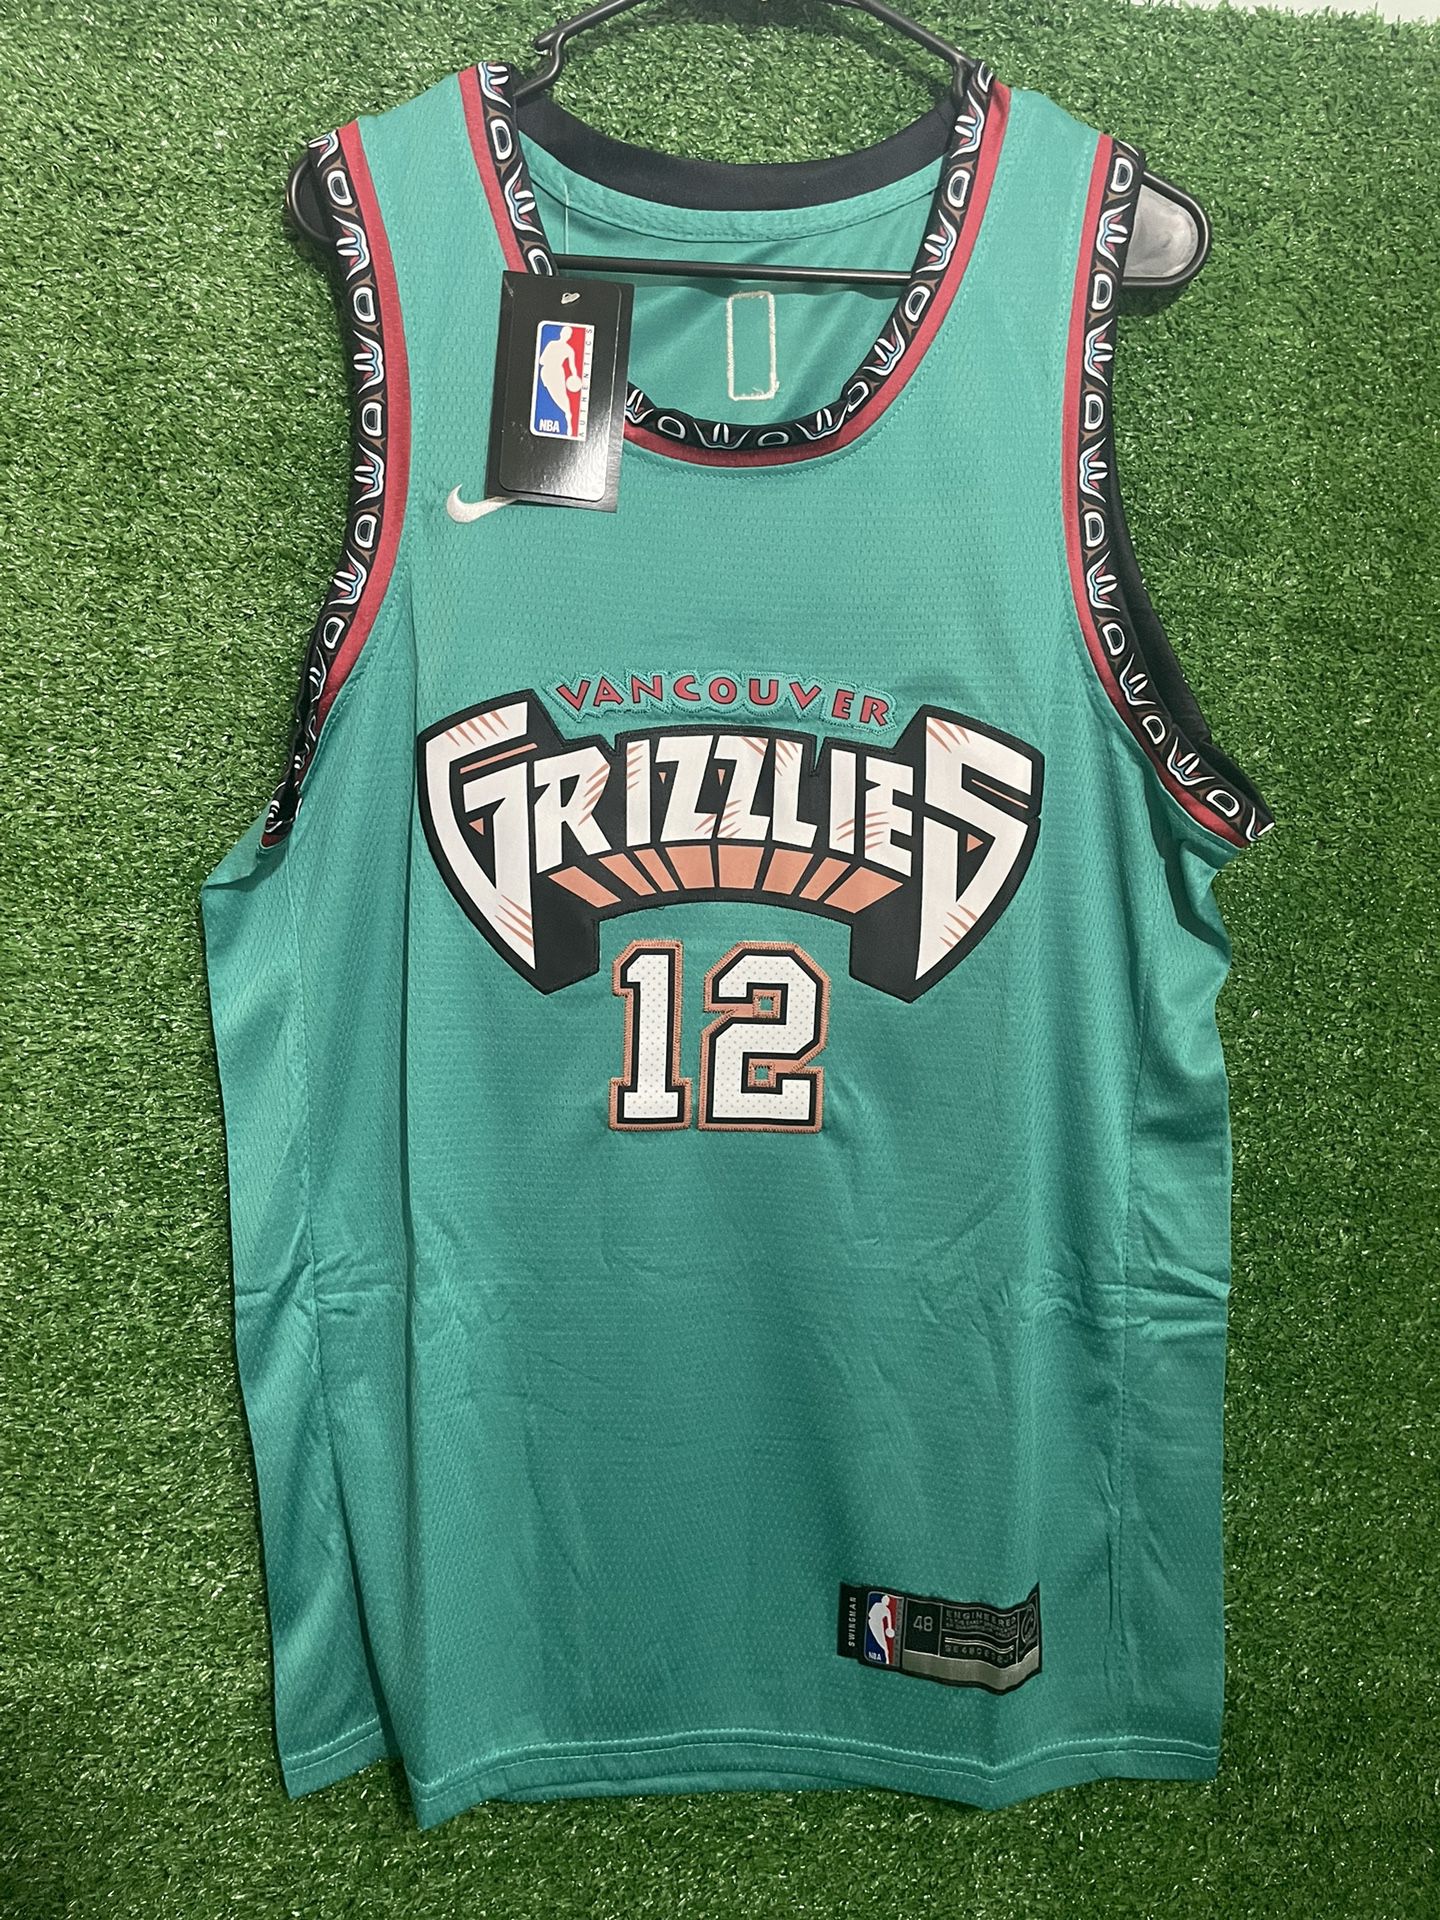 JA MORANT MEMPHIS GRIZZLIES NIKE JERSEY BRAND NEW WITH TAGS SIZES MEDIUM, LARGE AND XL AVAILABLE 